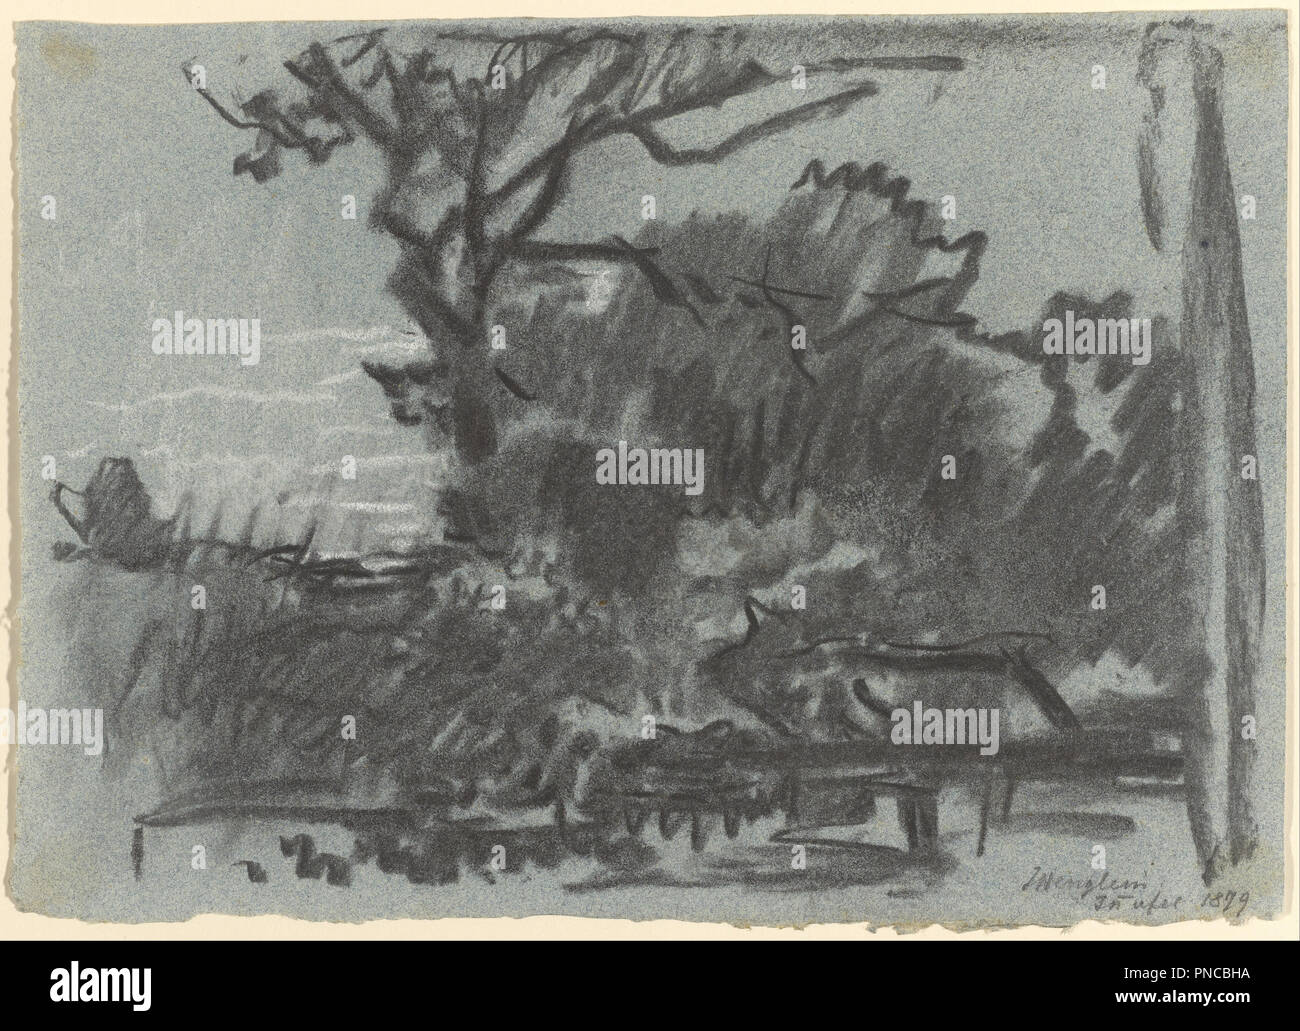 Forest Scene. Date/Period: 1879. Drawing. Black and white chalk. Height: 225 mm (8.85 in); Width: 320 mm (12.59 in). Author: Joseph Wenglein. Stock Photo